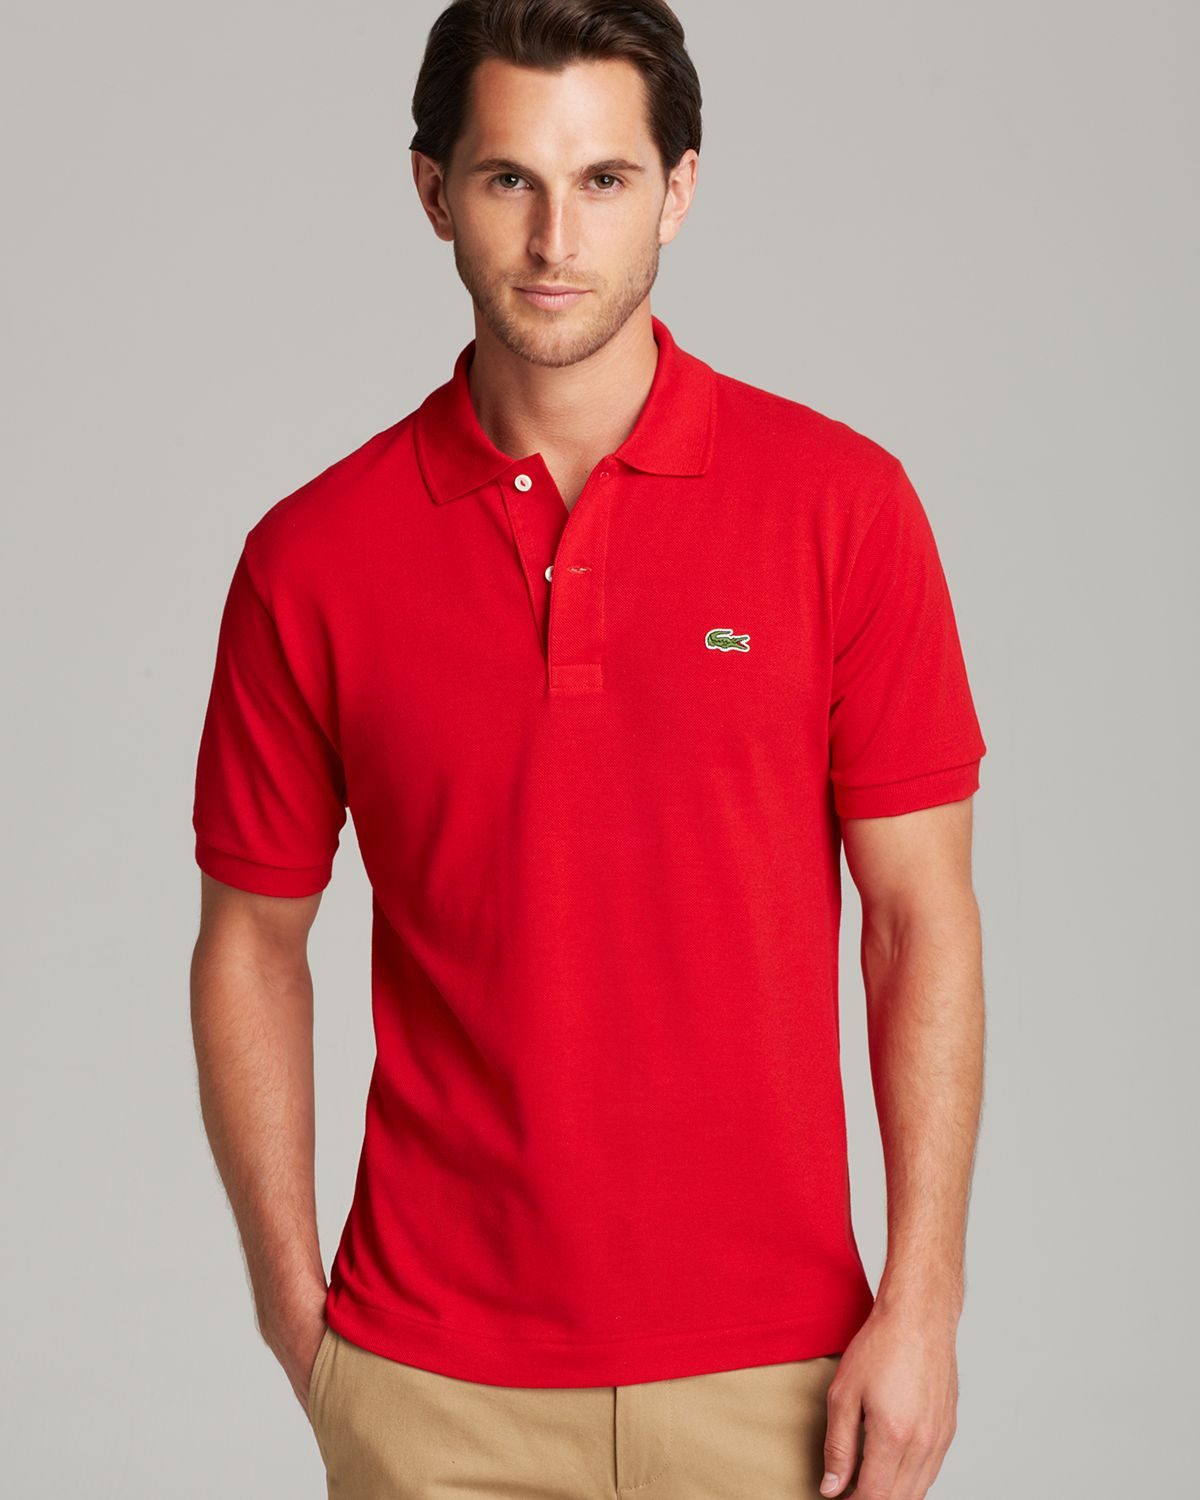 Lacoste Short Sleeve Piqué Polo Shirt - Classic Fit in Red for Men - Lyst